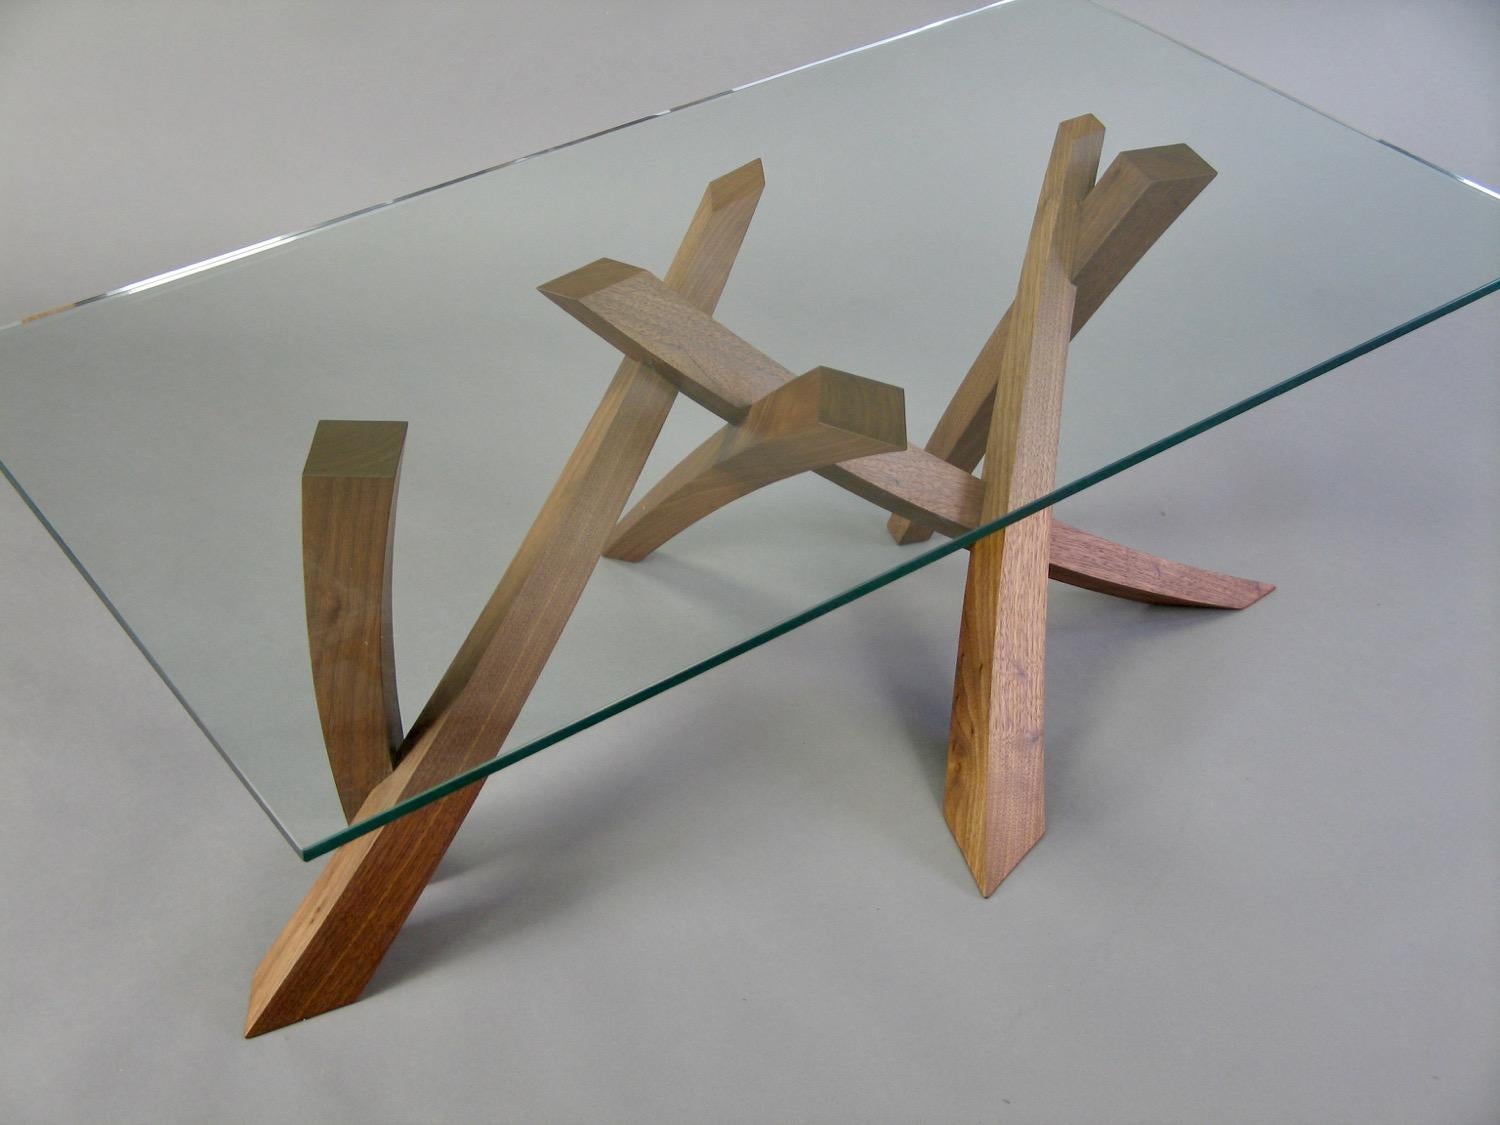 Sculptural Walnut and Glass Coffee Table by Thomas Throop/ Black Creek Designs In New Condition For Sale In New Canaan, CT